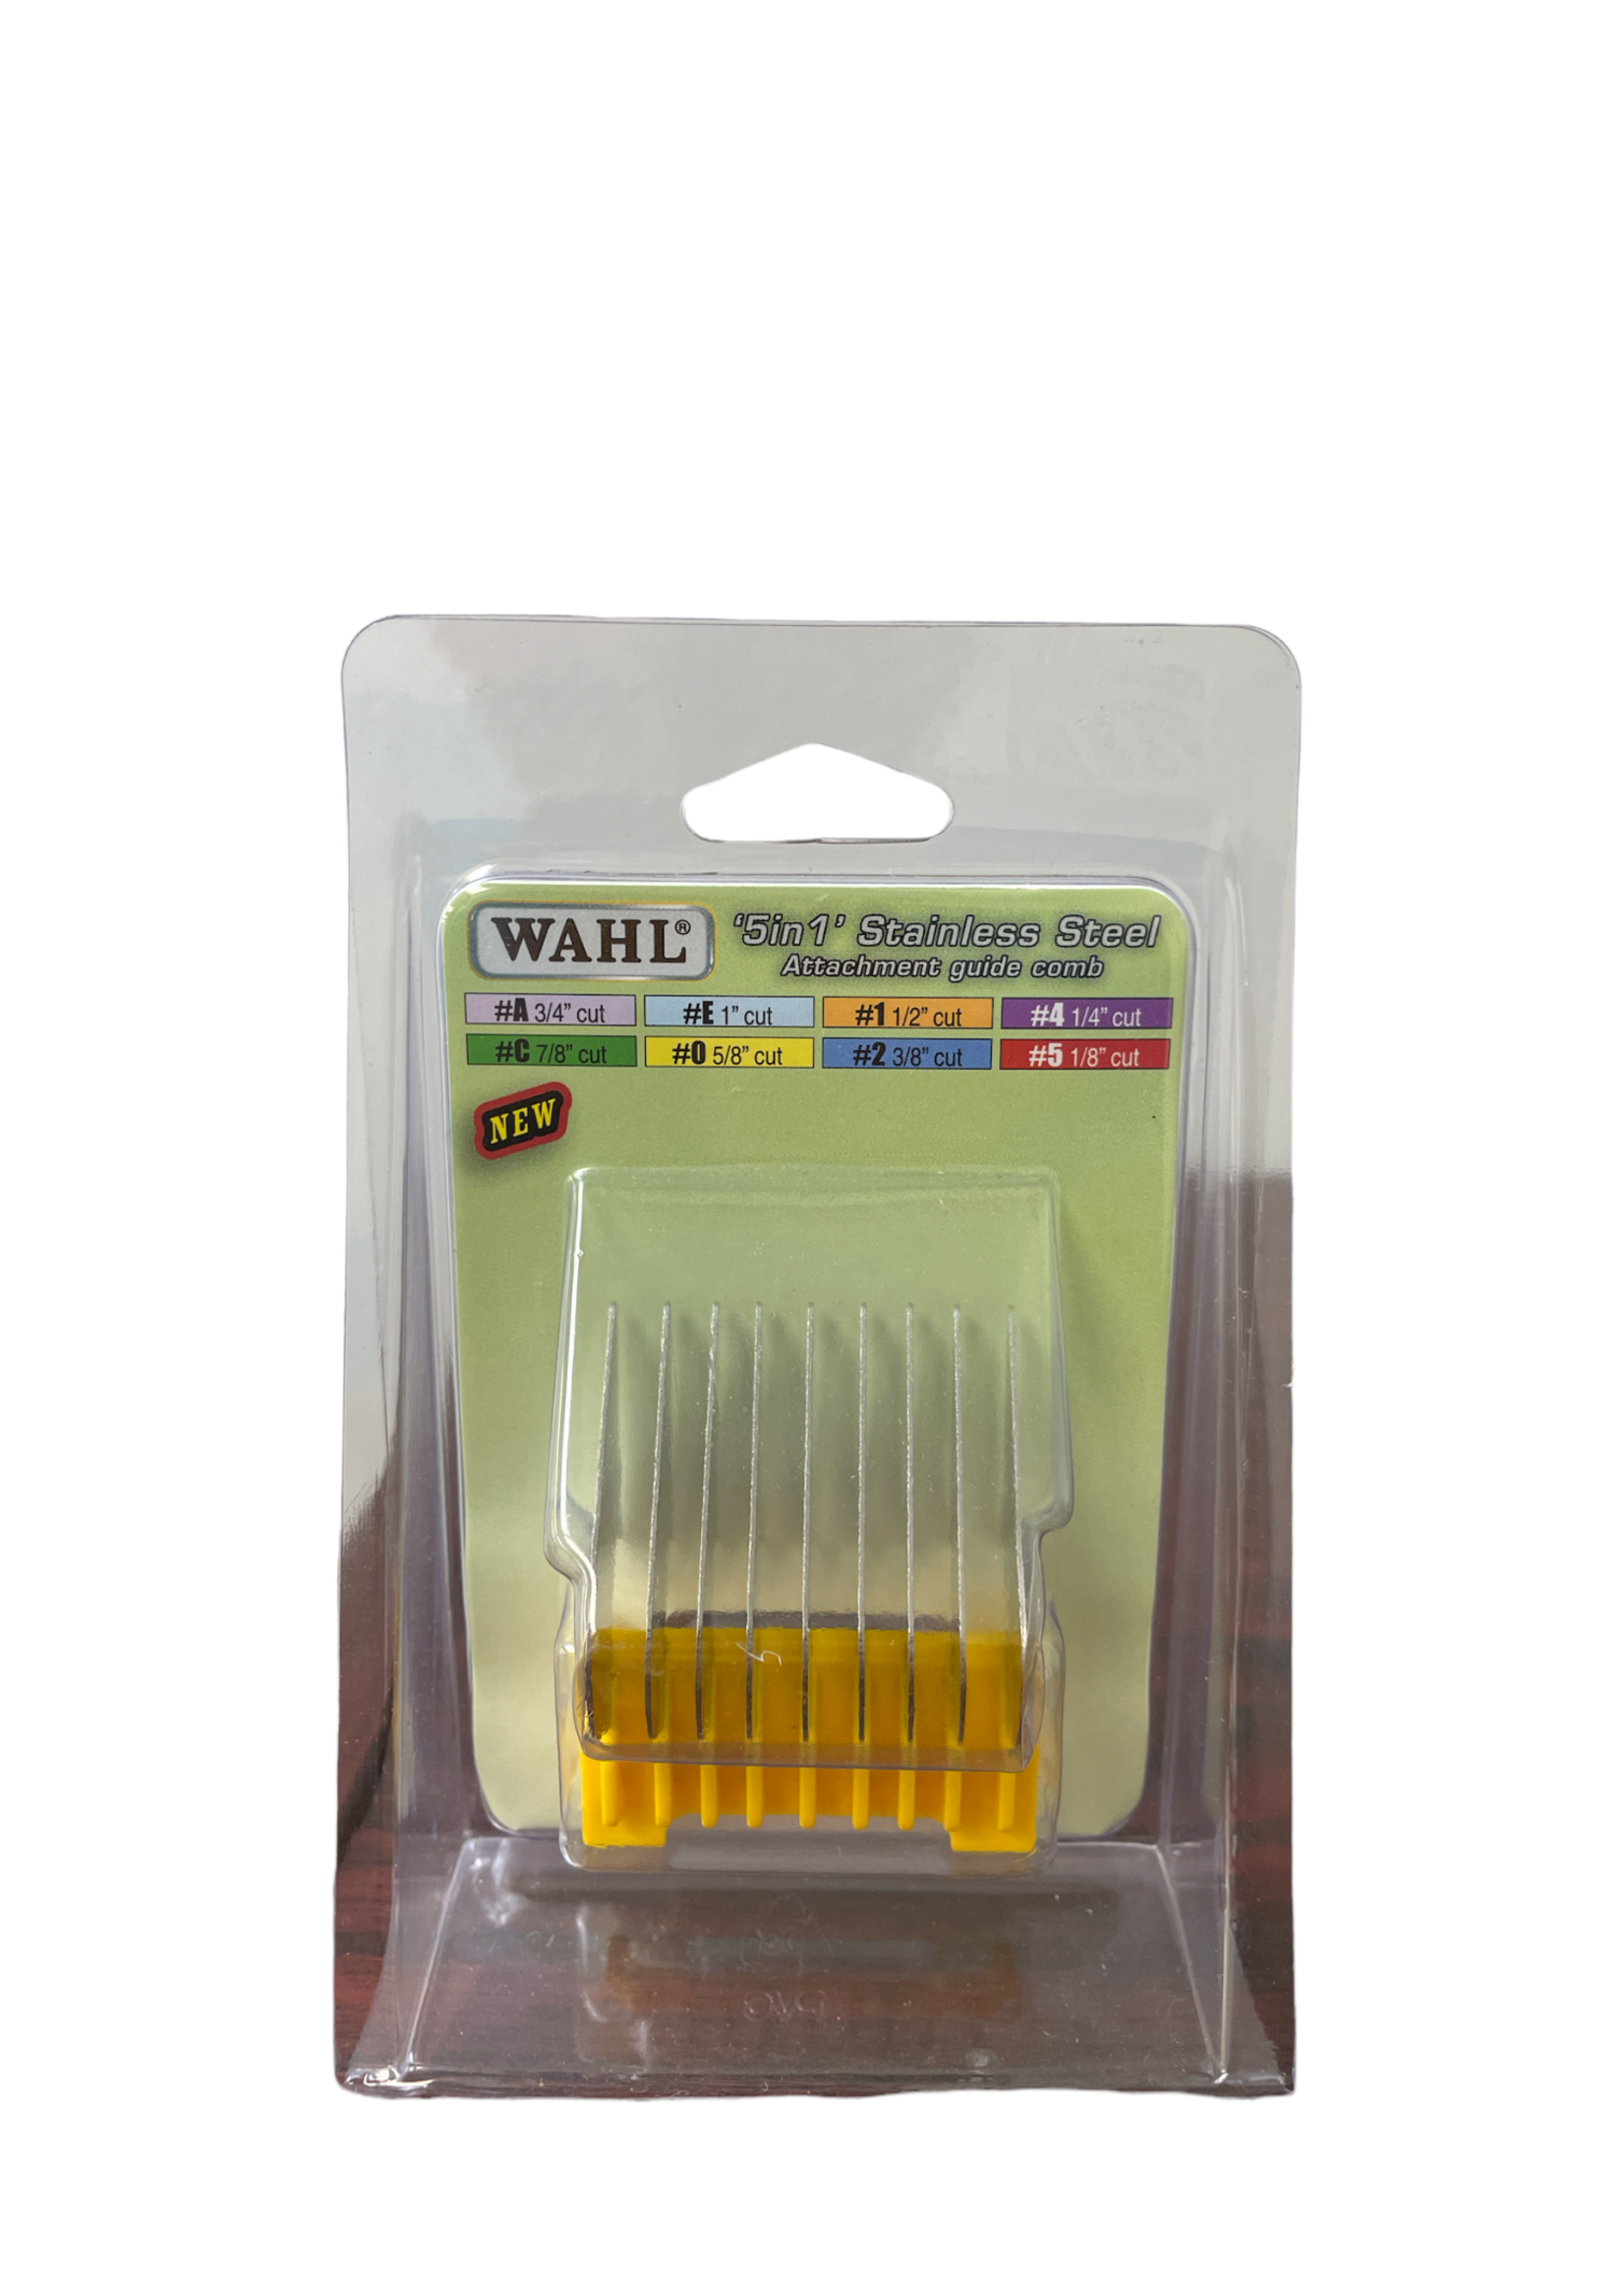 Wahl Wahl #0 comb for 5" in 1" blade-yellow.